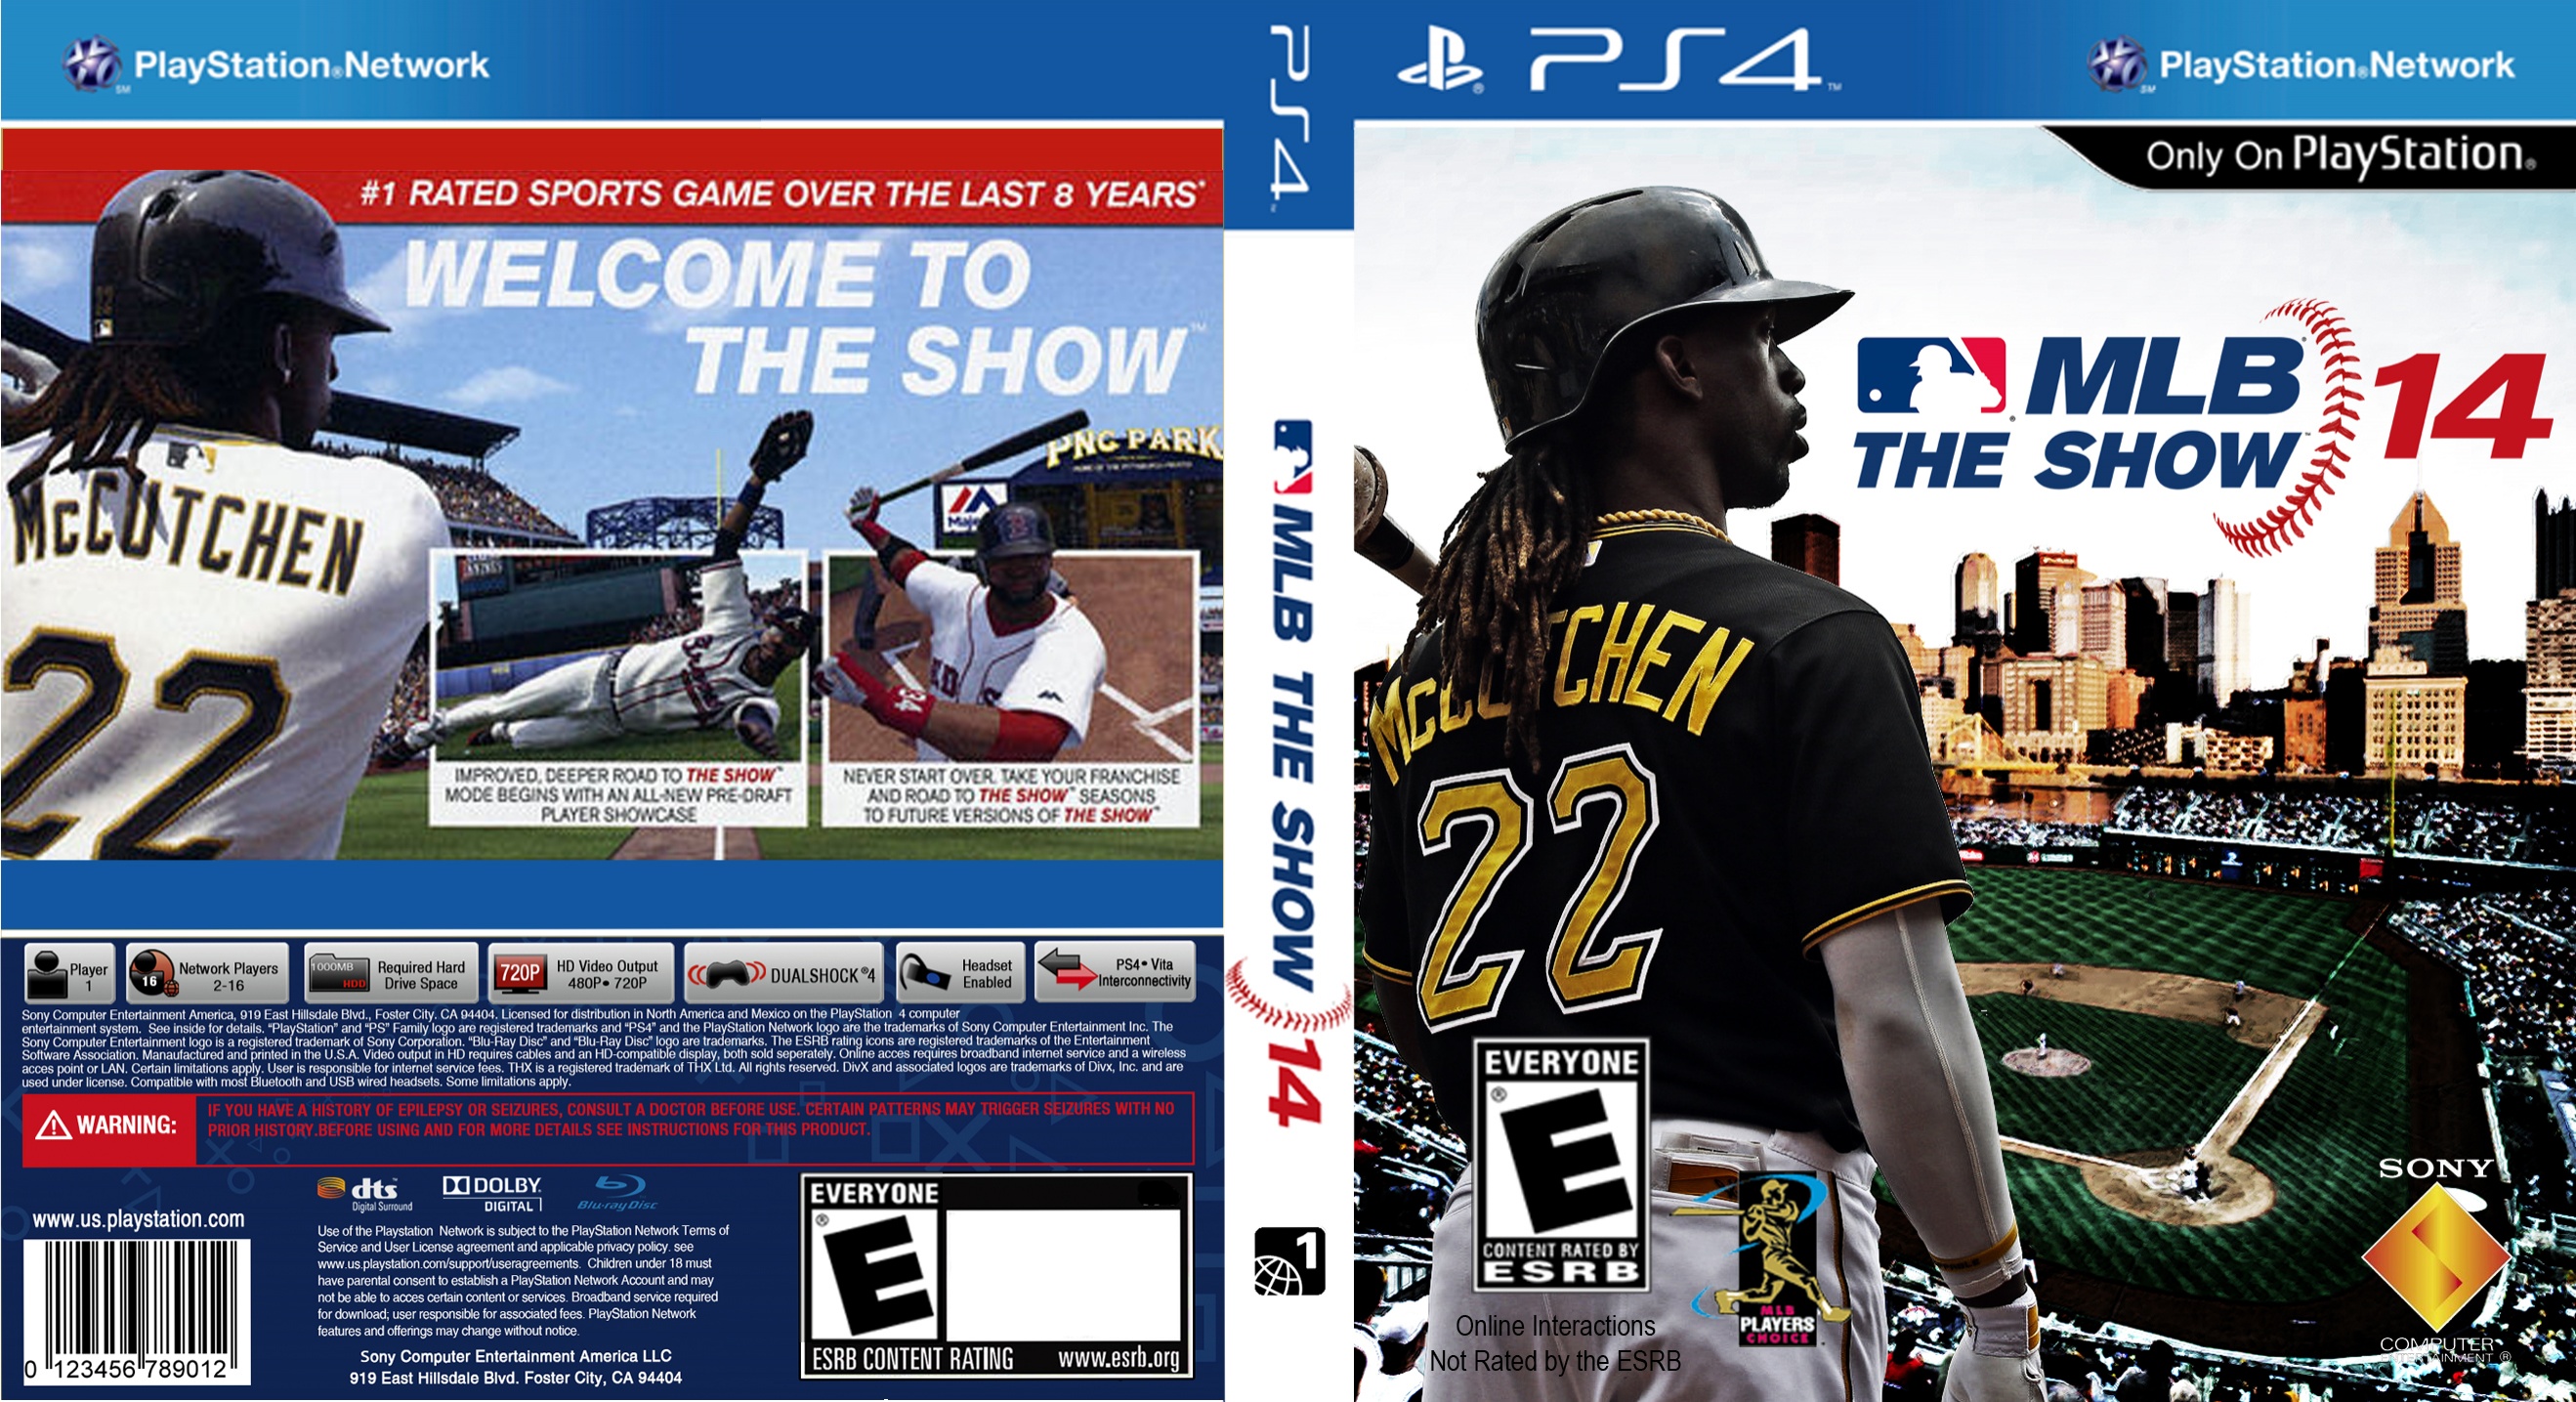 Viewing full size MLB The Show box cover